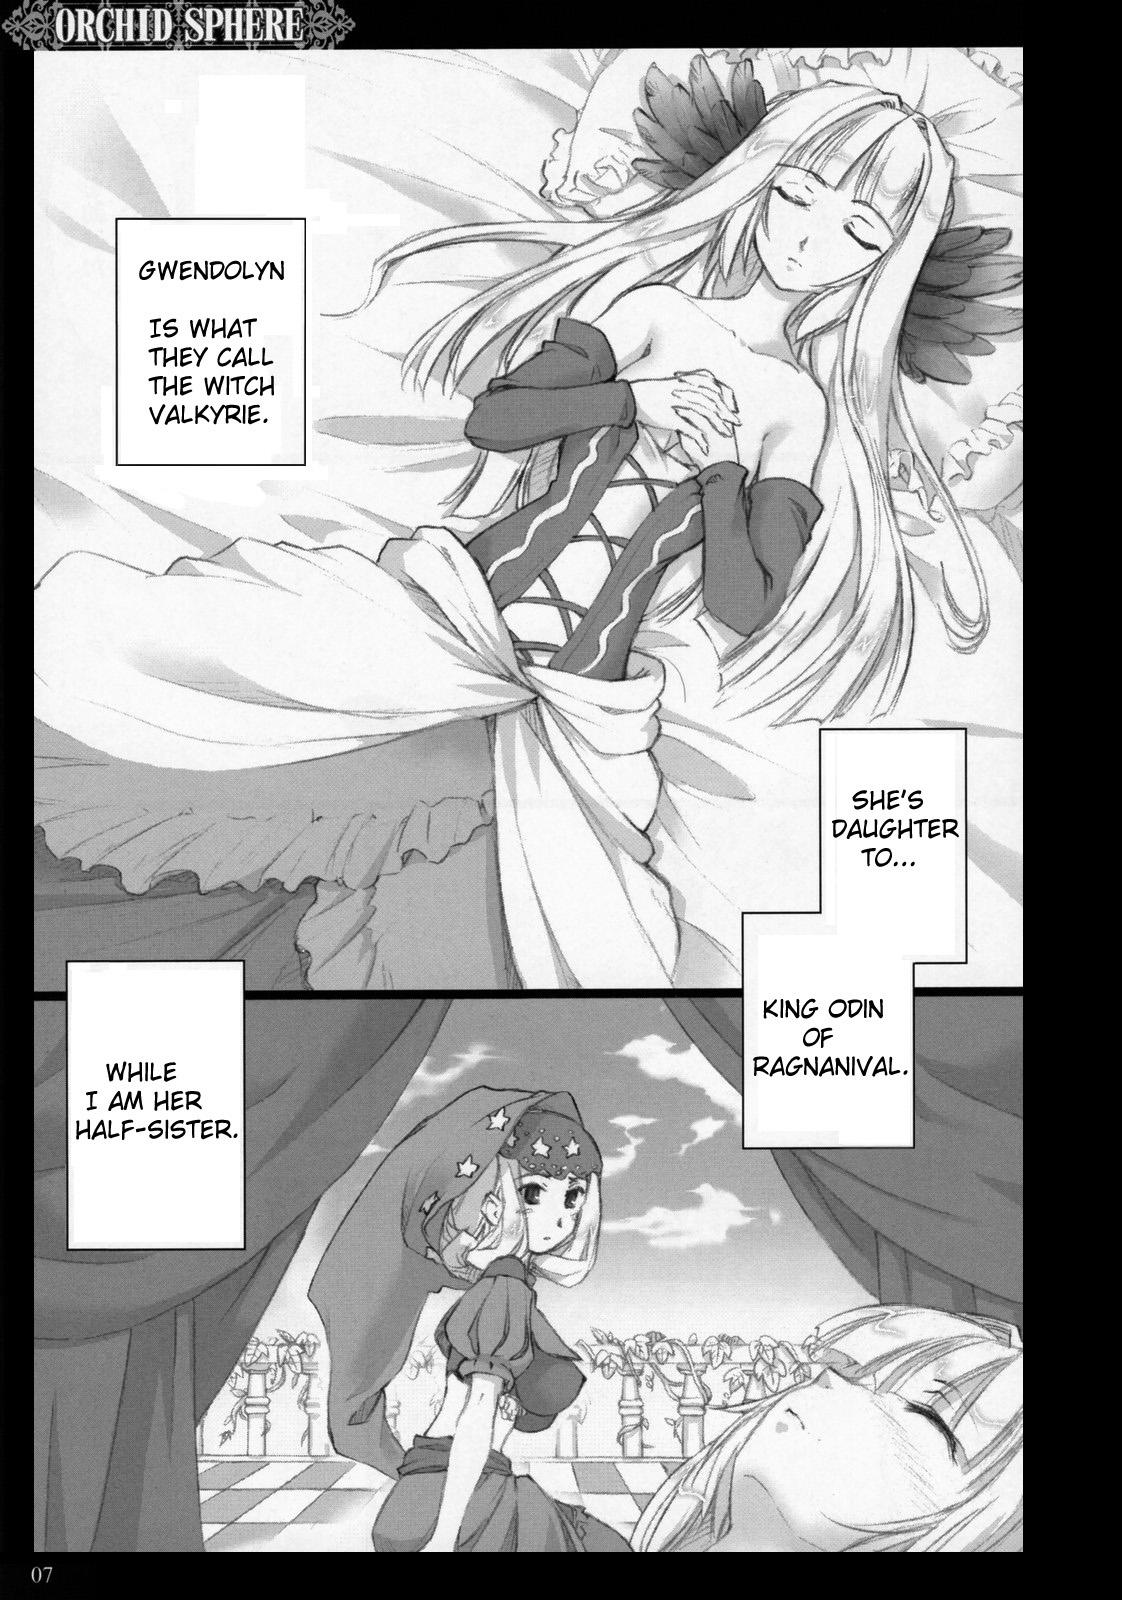 Outside Orchid Sphere - Odin sphere Aunt - Page 6